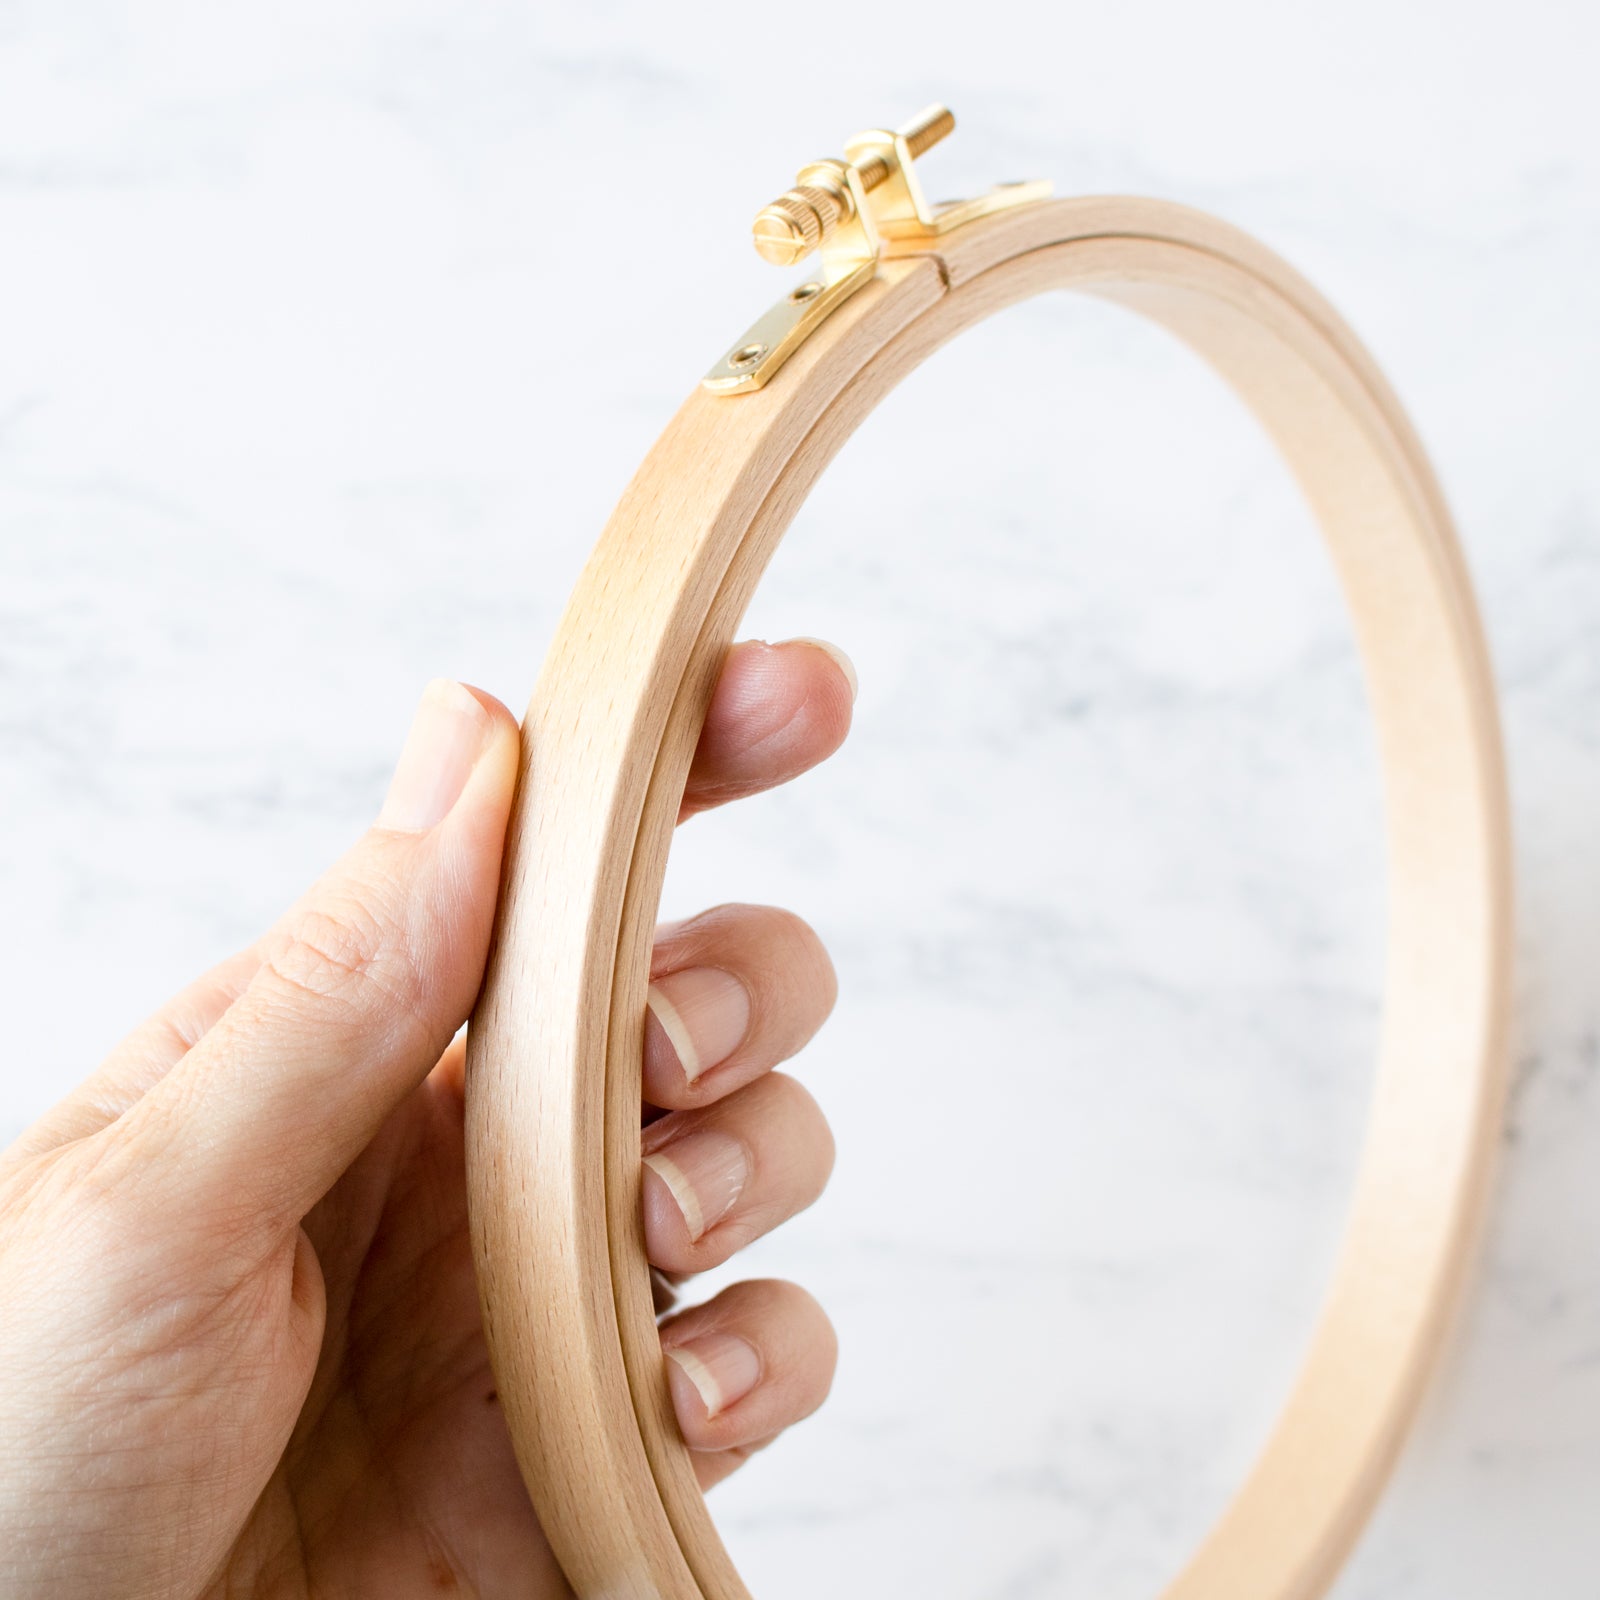 Udhayam Wooden Embroidery Hoop Ring Frame: Set of 2 pcs: for Cross Stitch  Craft, Sewing Tool, Embroidery (6,12) Inches. - Wooden Embroidery Hoop Ring  Frame: Set of 2 pcs: for Cross Stitch